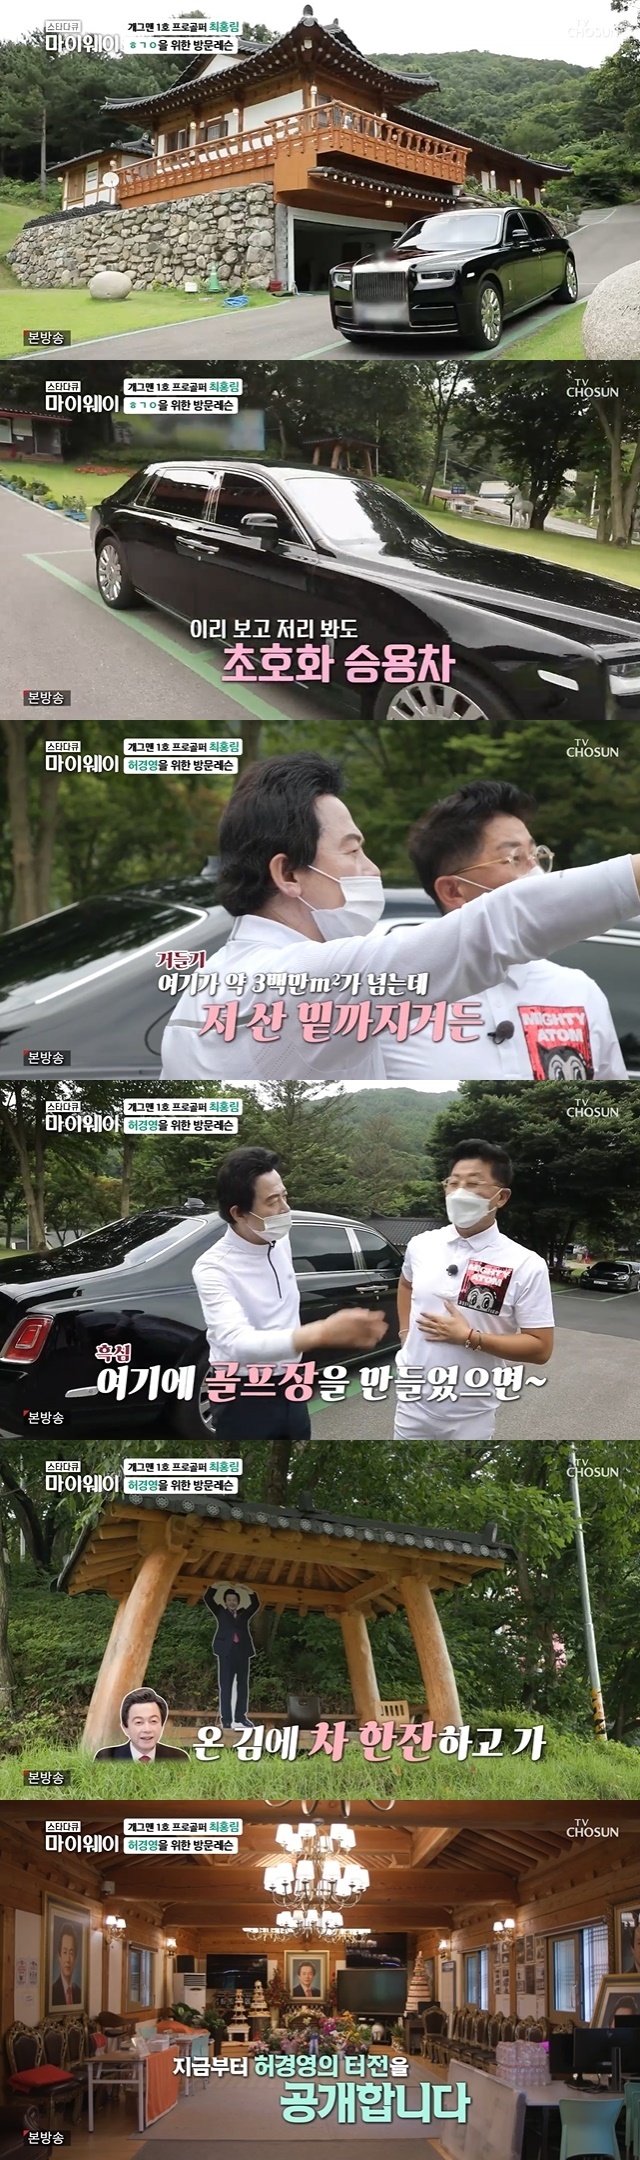 Hundreds of millions of The Red Cars, owned by heo gyeong-yong, have been unveiled.In the 256th TV drama star documentary myway broadcast on July 25, heo gyeong-yong appeared in a relationship with comedian Choi Hong-rim.On this day, Choi Hong-rim took a visiting lesson to teach heo gyeong-yong as a professional golfer.Choi Hong-rim admired the Rollsroyd The Red Car, which was erected in front of him upon arrival at the residence of heo gyeong-yong; he said: Oh good.Its my style, he said, admiring, I have to ask for my life lessons. The interior of the heo gyeong-yong residence was also revealed.Choi Hong-rim said, Is not it like King Thailand? He said, I always wanted to sit here. He expressed his personal desire for a colorful chair.Heo gyeong-yong sat down and said, Where are all the servants?